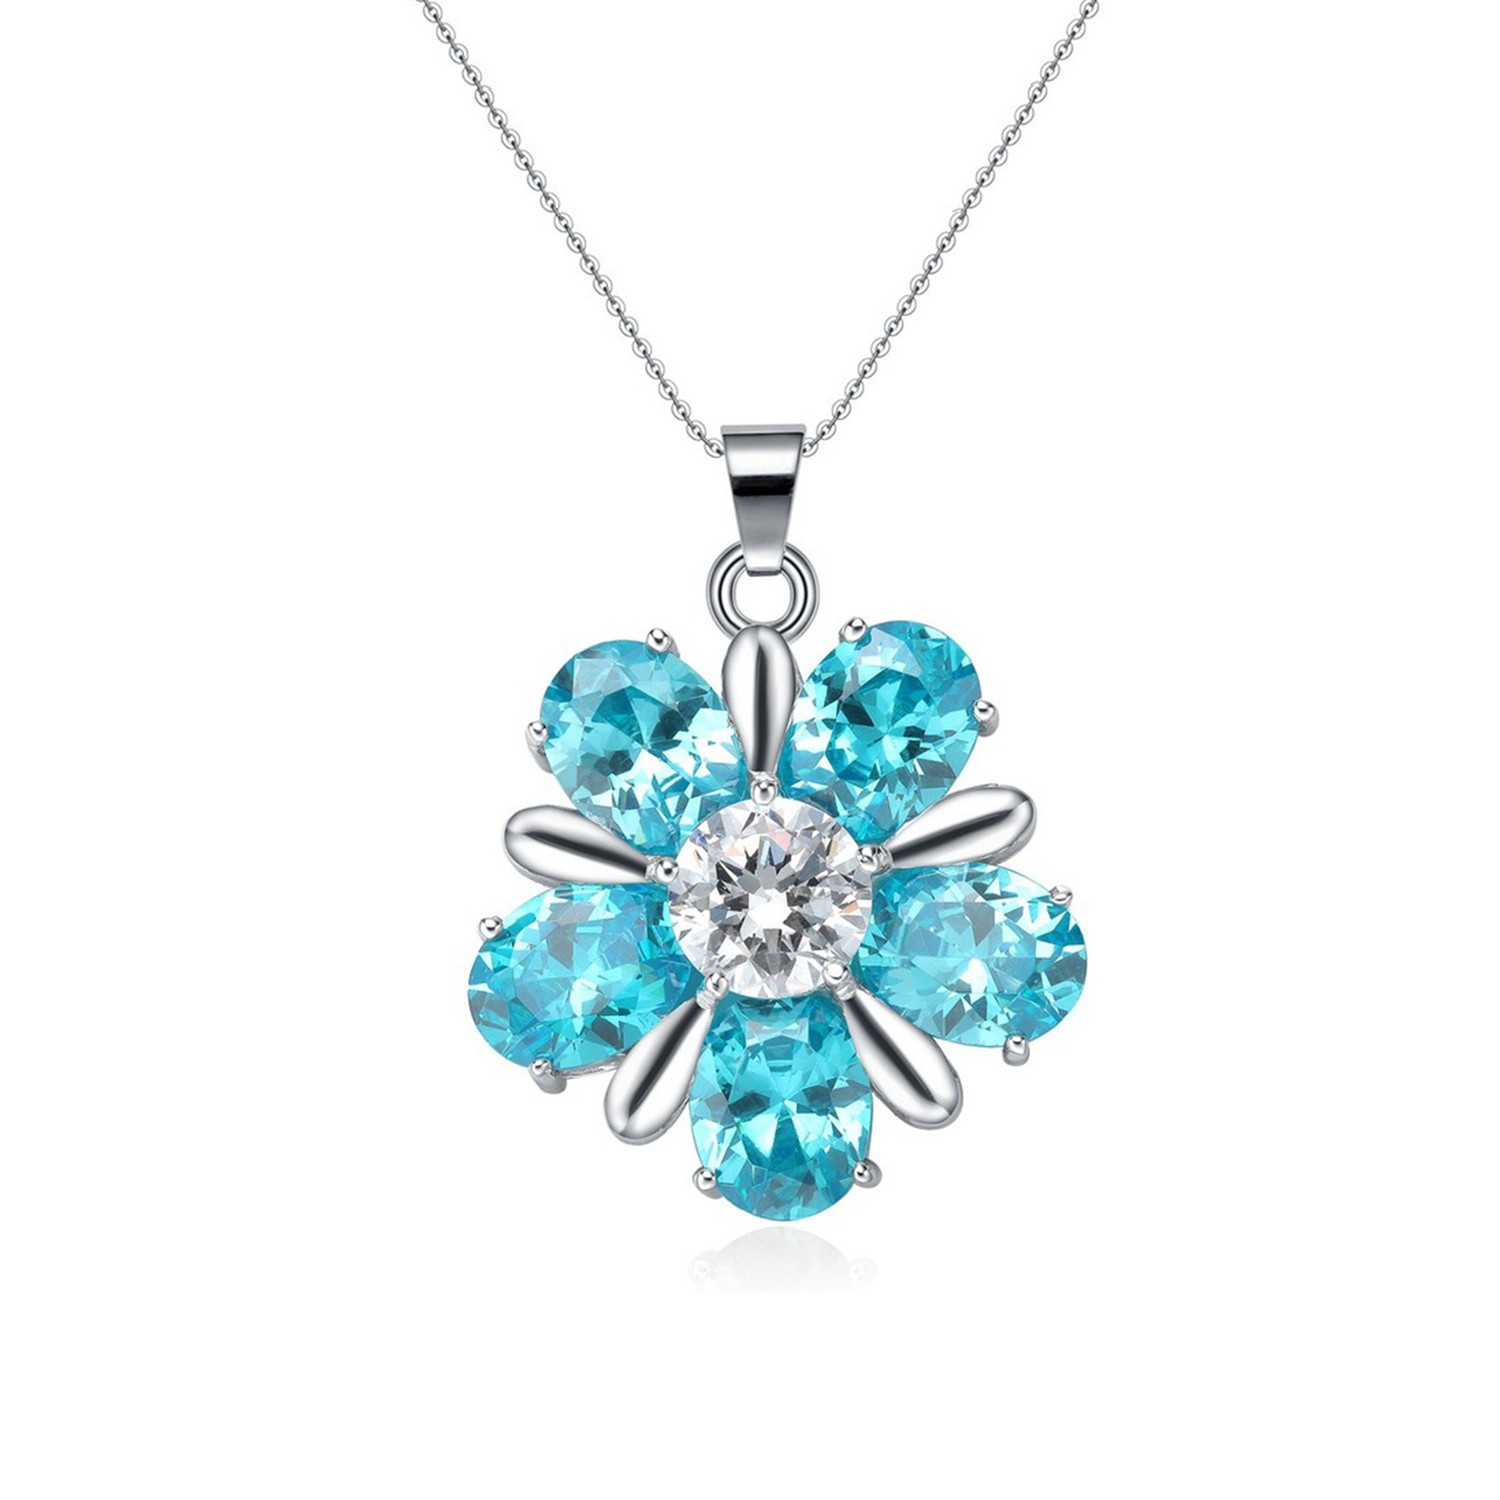  2021 New Fashion Rhodium Plated blue Cushion Silver Plated Flower Cz Pendant Necklace